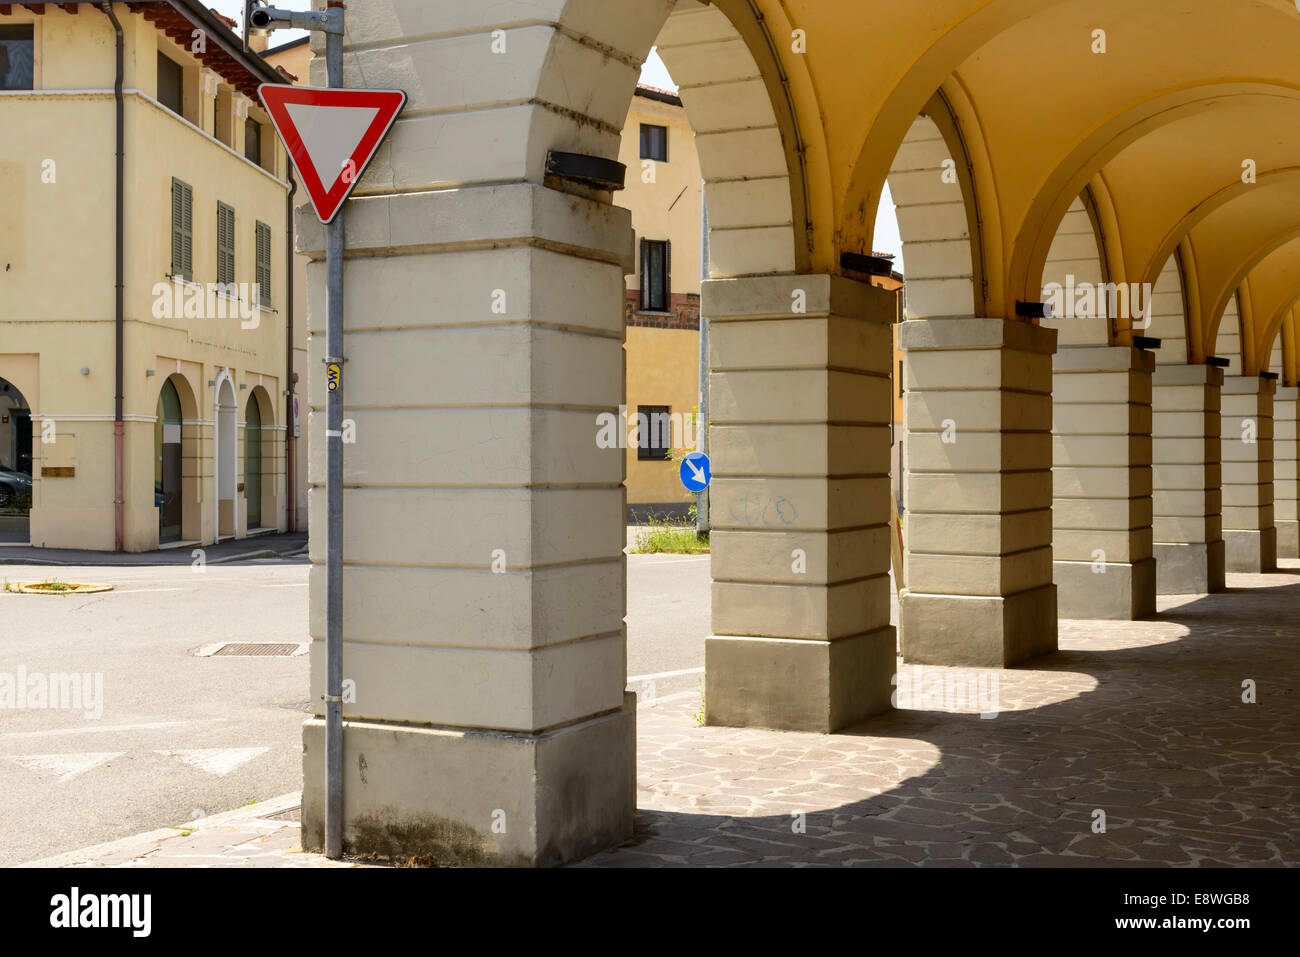 Soncino, foreshortening of old arcades and their shade in city center, shot in bright summer light Stock Photo